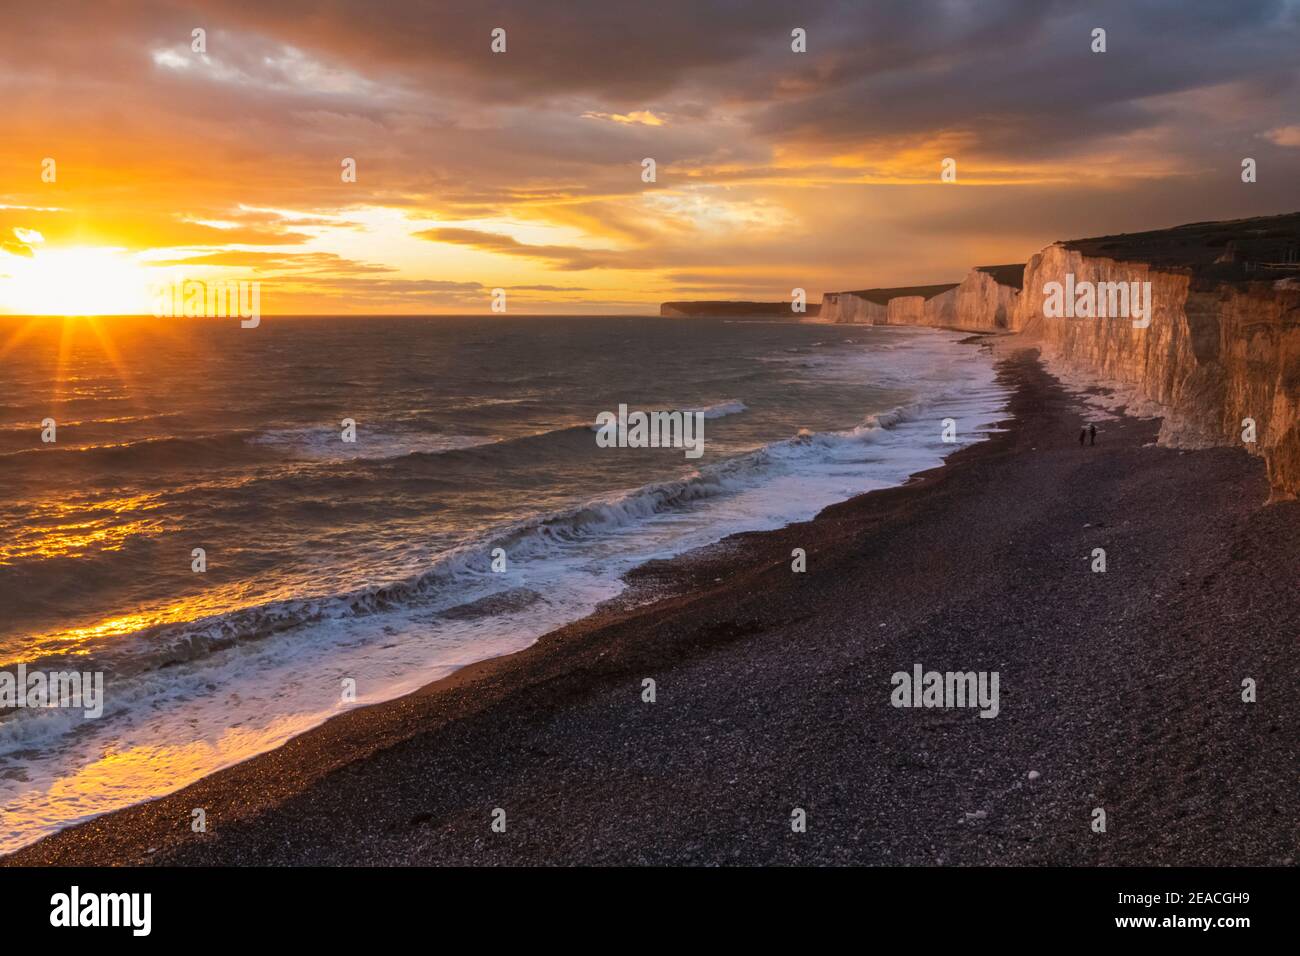 England, East Sussex, Eastbourne, Birling Gap, The Seven Sisters Cliffs and Beach in The Late Afternoon Light Stock Photo